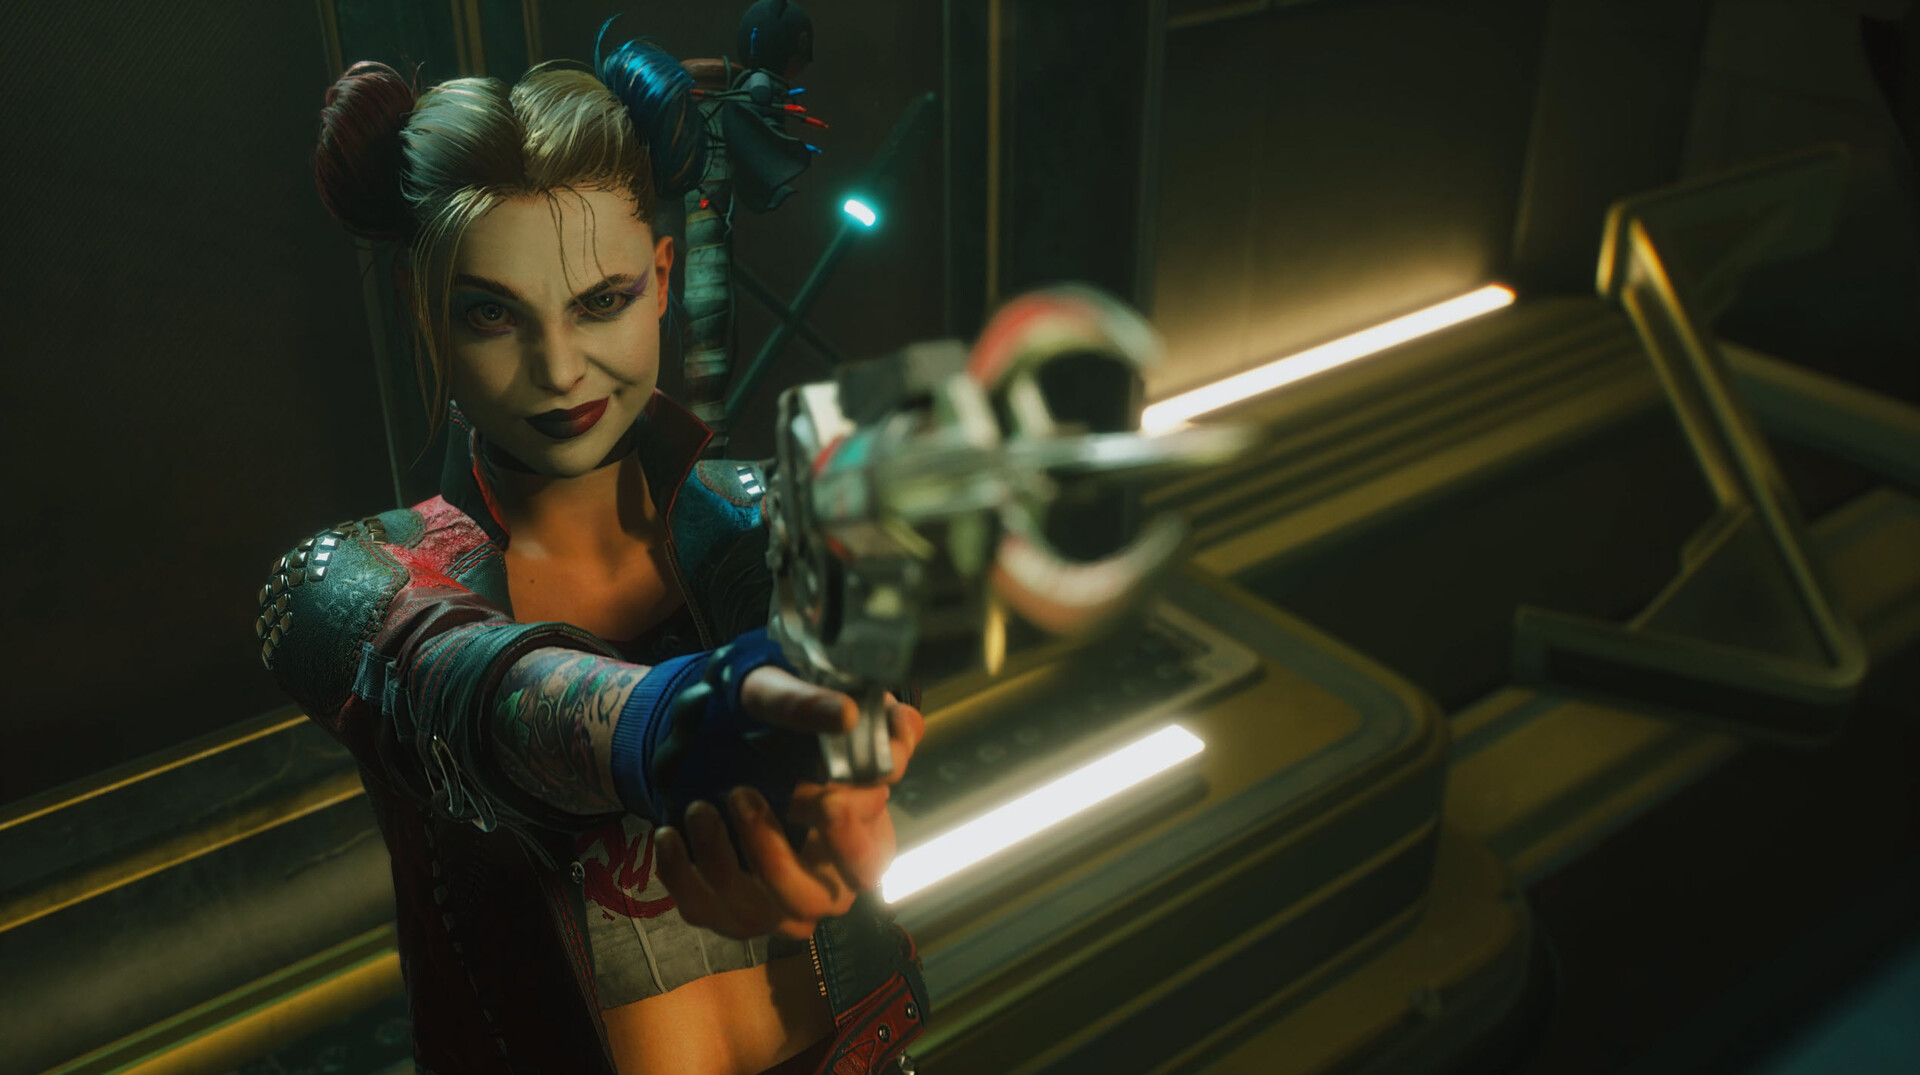 Fun Trailer For The Video Game SUICIDE SQUAD: KILL THE JUSTICE LEAGUE —  GeekTyrant